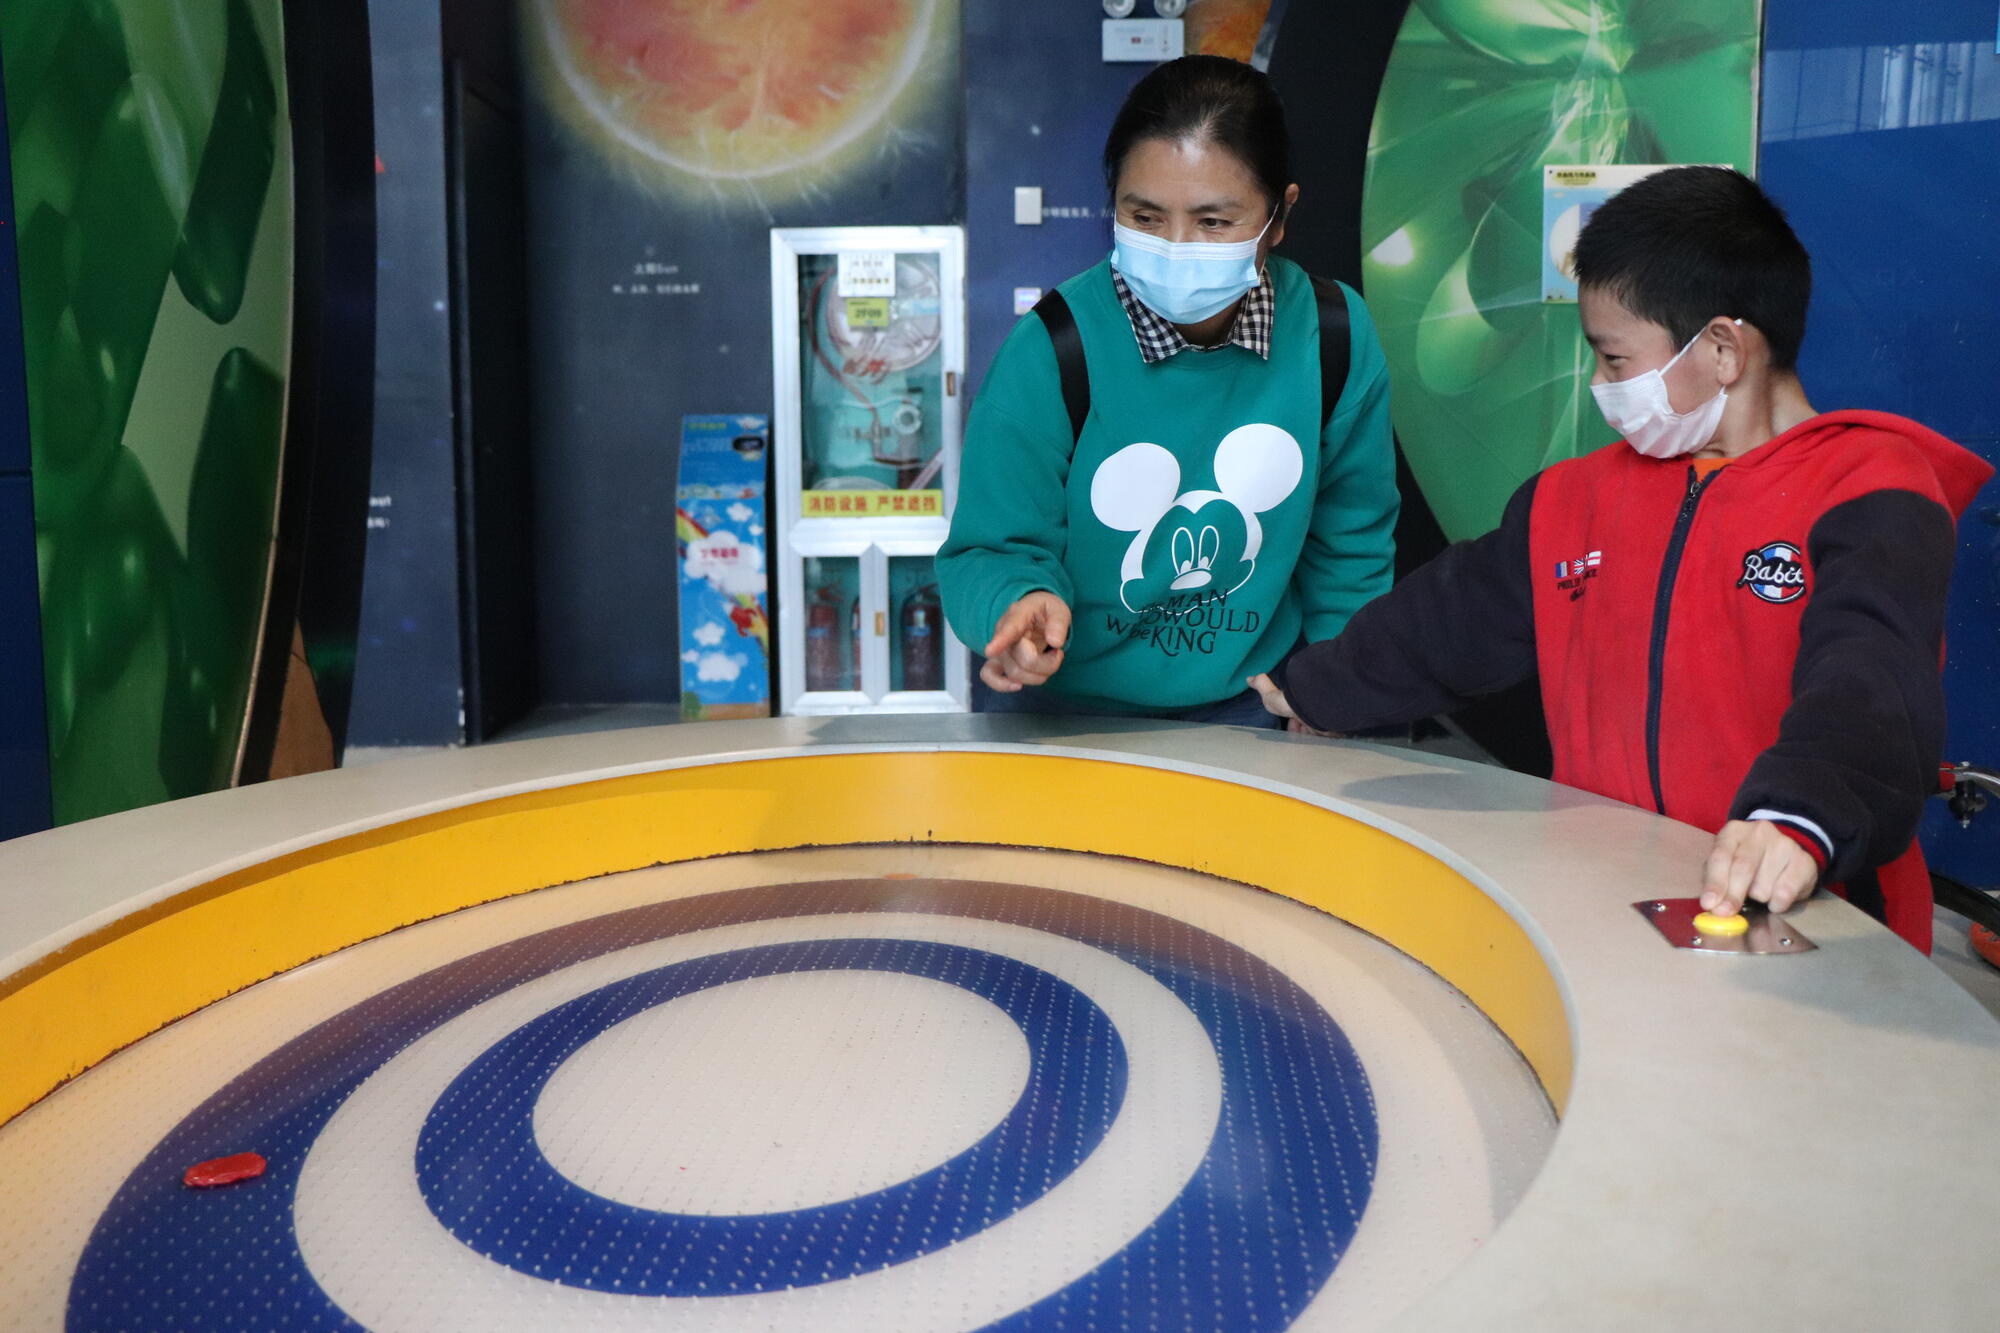 Xiao Ran trying a scientific experiment at the Science Centre